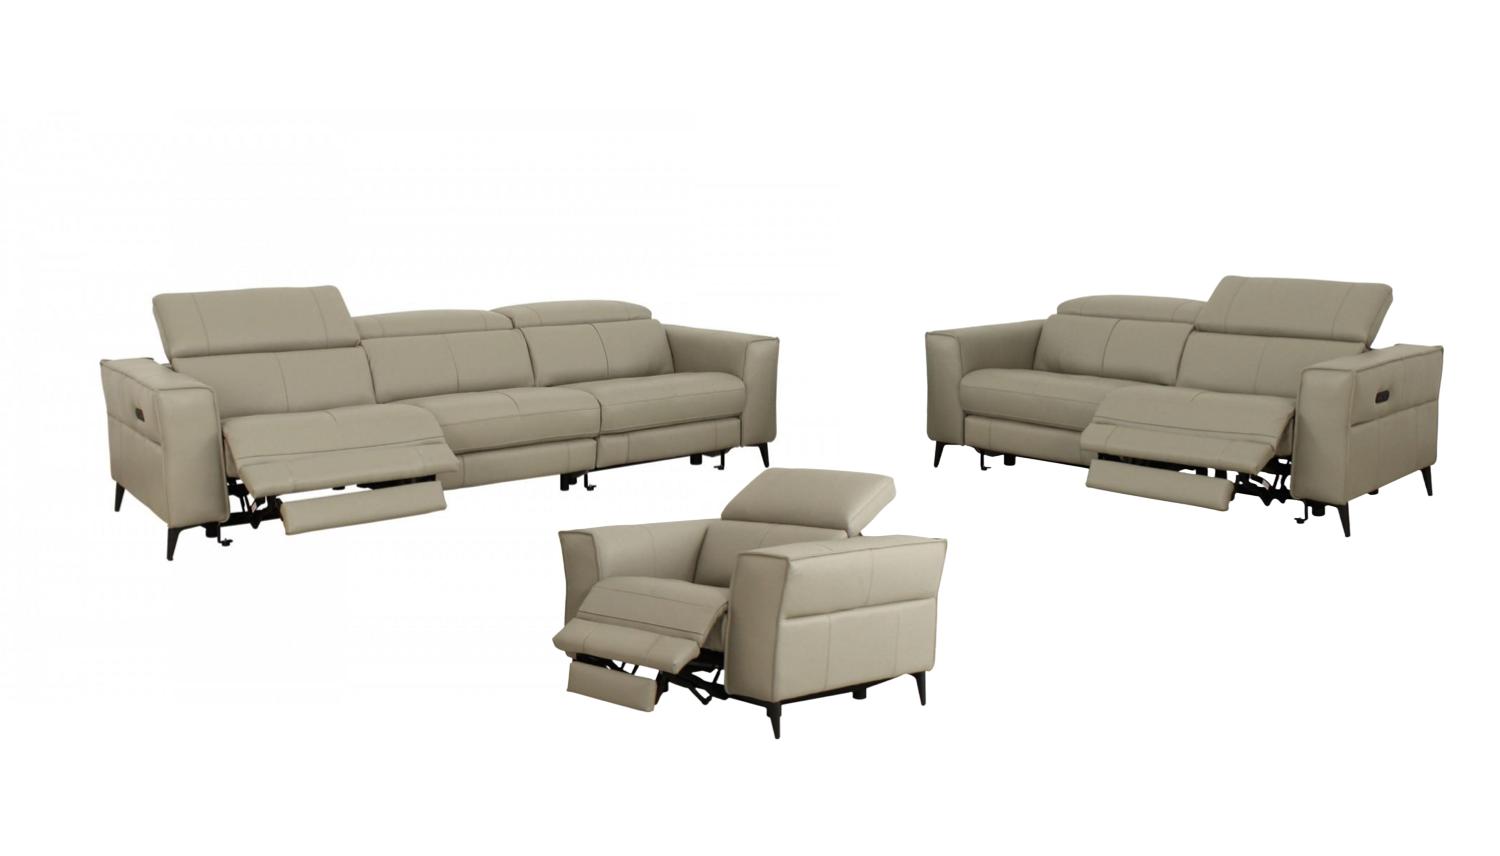 

    
Beige Leather Living Room Set Recliners by VIG Nella VGKNE9193-LTGRY-4S-3pcs
